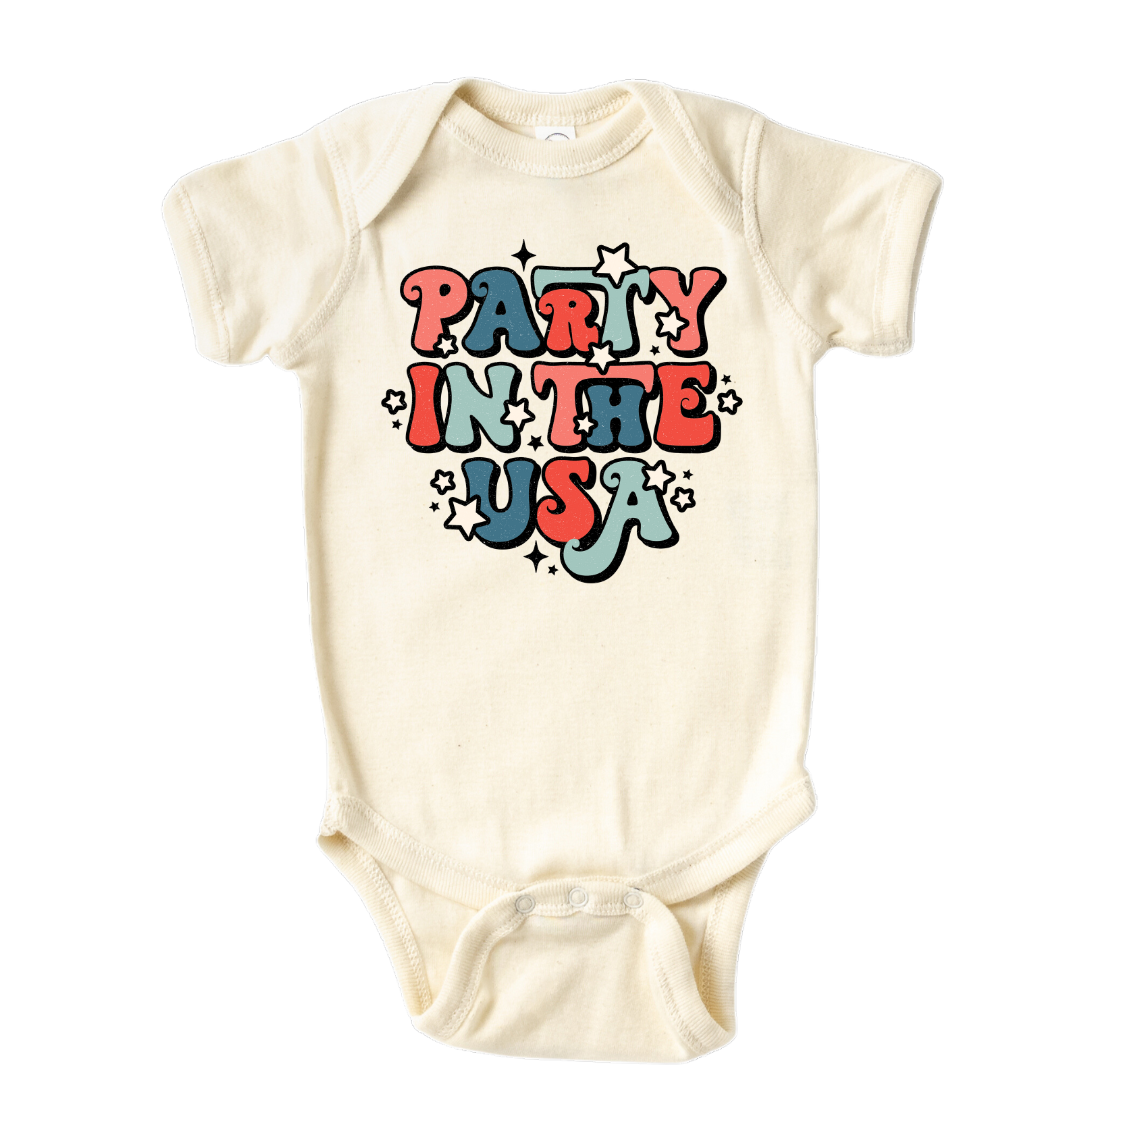 A kids' t-shirt with the vibrant text 'Party in the USA' printed on it. The design captures the festive and patriotic spirit, making it perfect for celebratory occasions. Let your child join in the fun and showcase their love for partying with this eye-catching tee